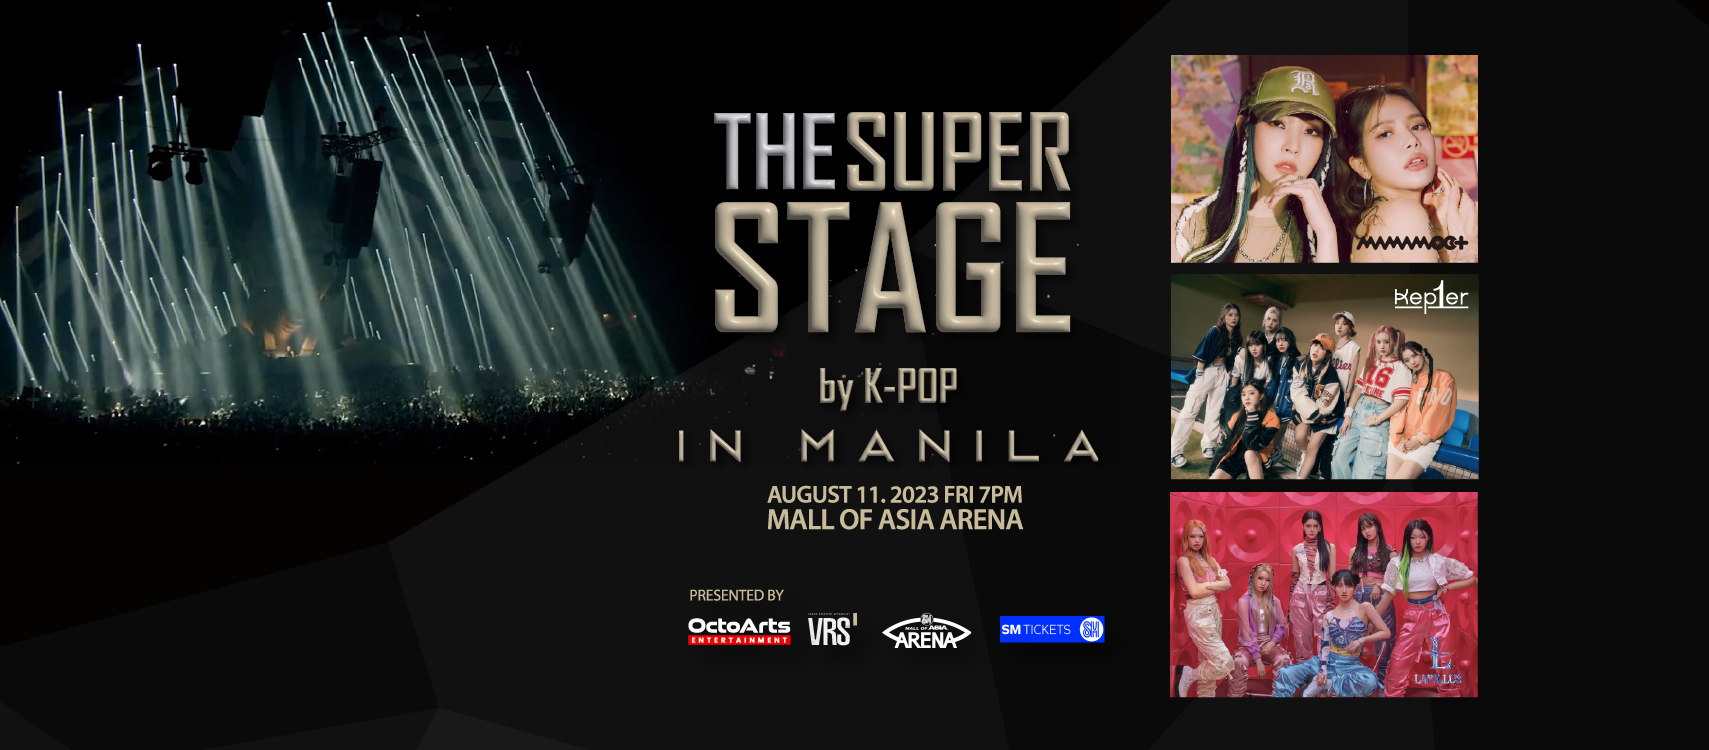 kep1er-lapillus-and-MAMAMOO-to-perform-in-manila-this-august